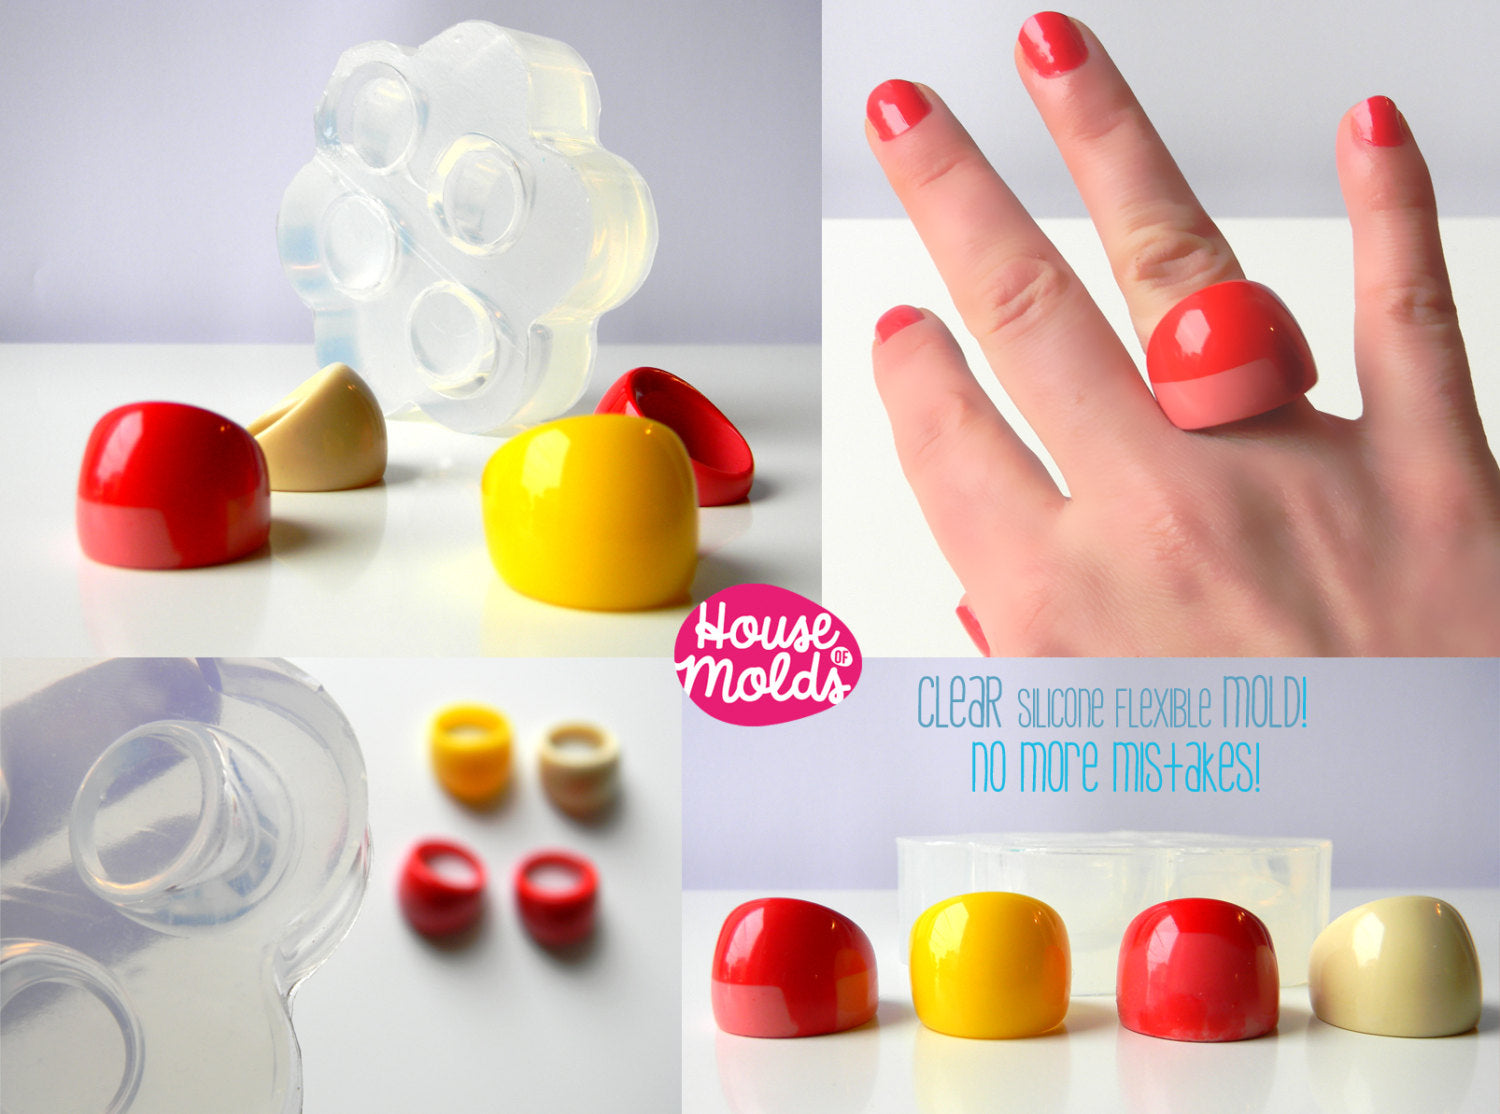 4 sizes Cube Rings clear Mold- 4 sizes Cube rings resin rings maker-su –  House Of Molds